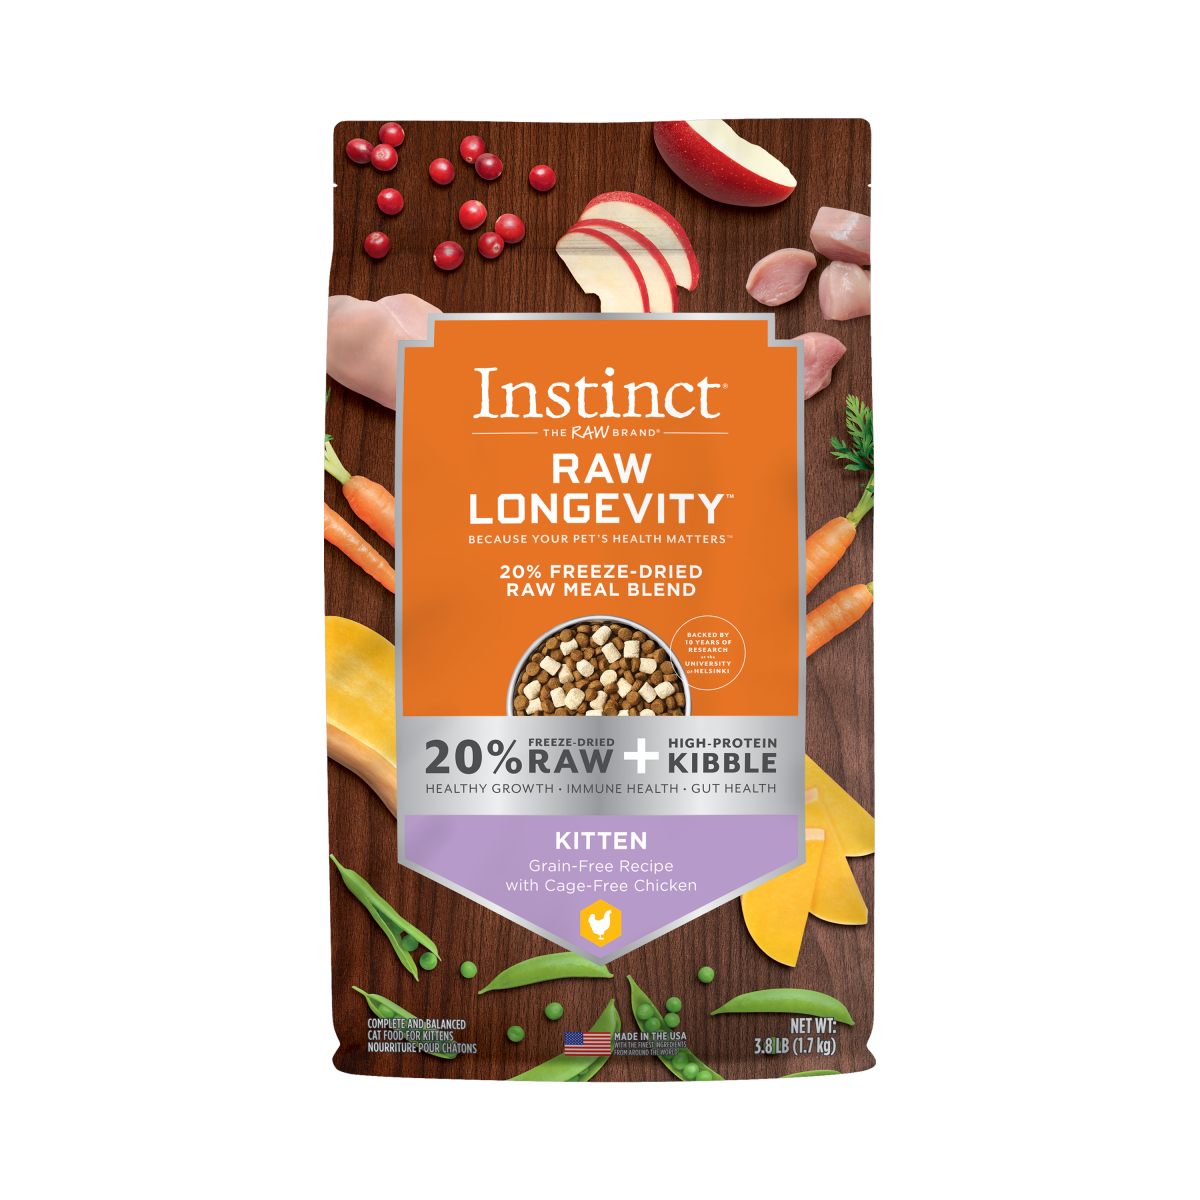 Instinct - Raw Longevity 20% Freeze-Dried Raw Meal Blend Cage-Free Chicken Recipe (For Kittens)